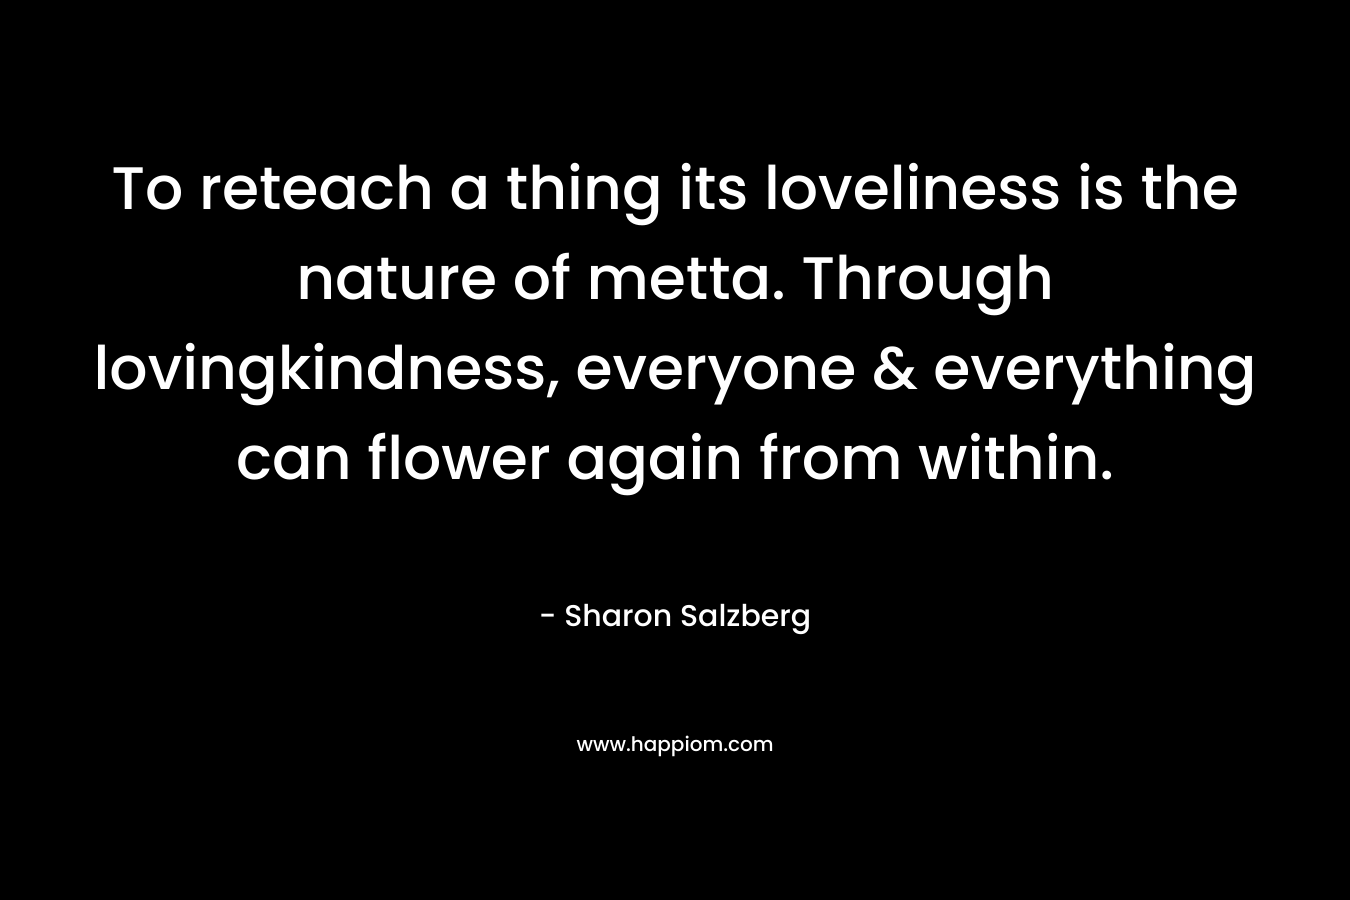 To reteach a thing its loveliness is the nature of metta. Through lovingkindness, everyone & everything can flower again from within. – Sharon Salzberg